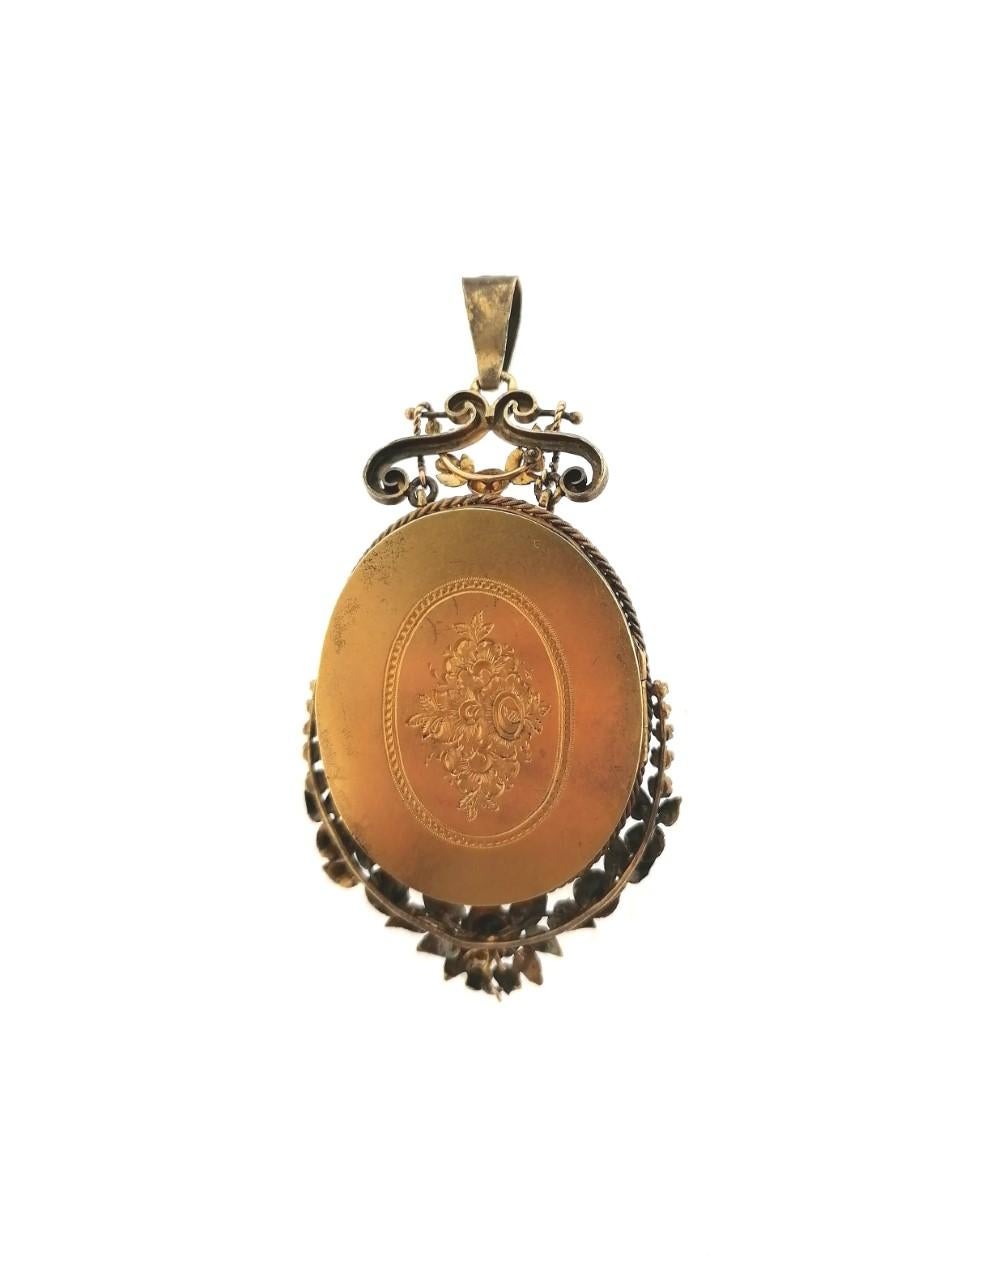 Lovely 19th century 14 carats gold locket pendant with a cameo in white agate. Exquisite and very well carved and done   the branches and the flowers around the central cameo. Inside it is possible to put a photo or a lock of hair like in the past.